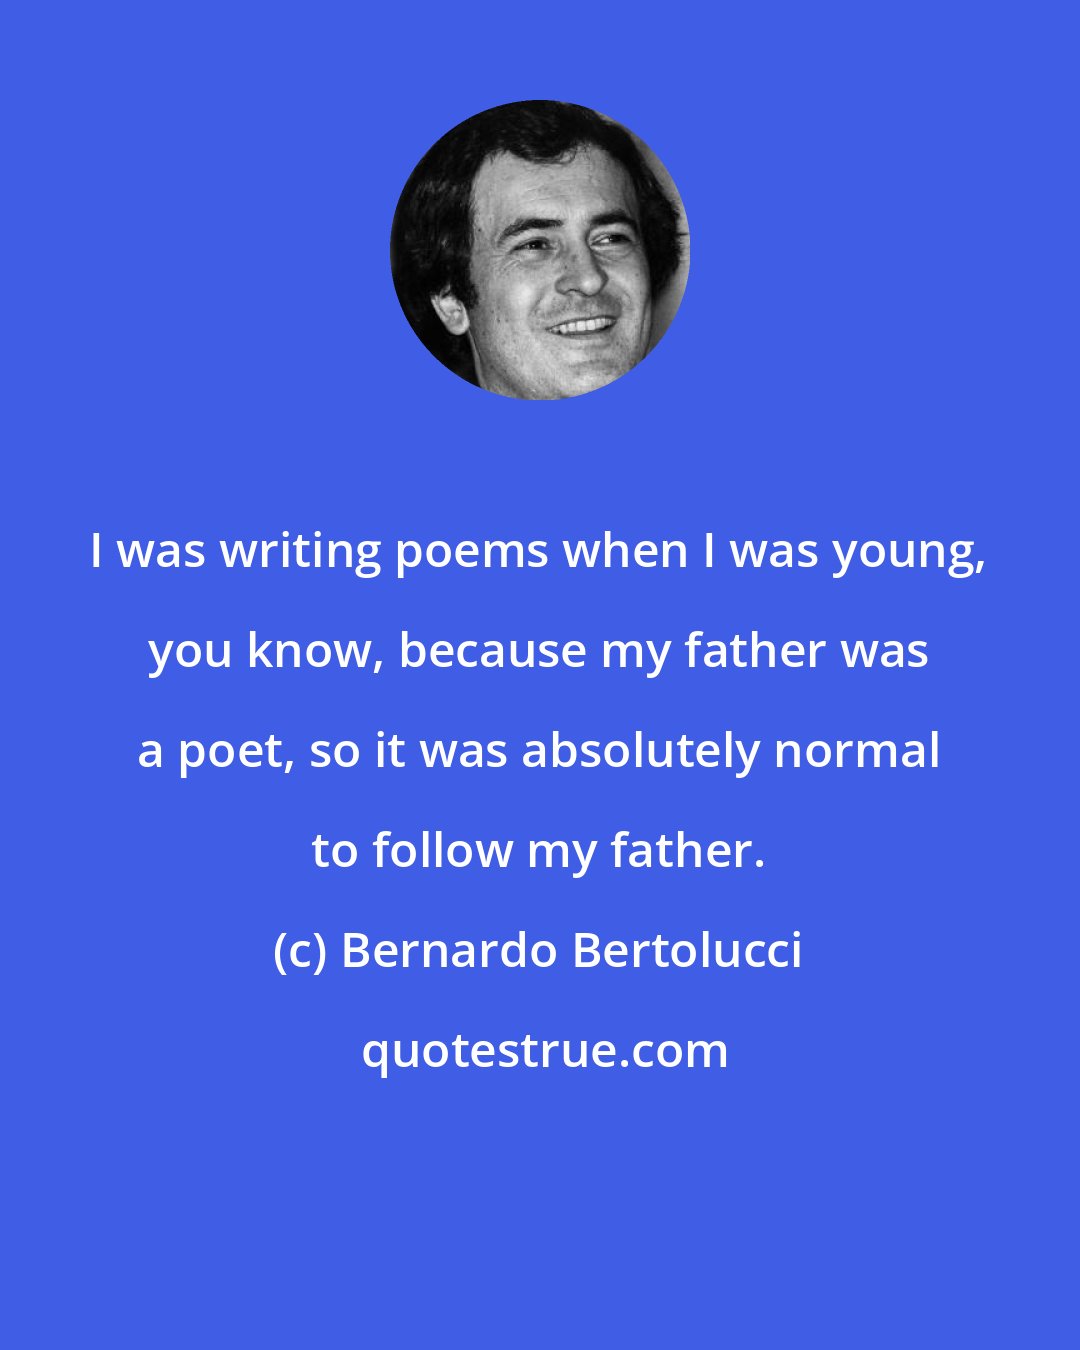 Bernardo Bertolucci: I was writing poems when I was young, you know, because my father was a poet, so it was absolutely normal to follow my father.